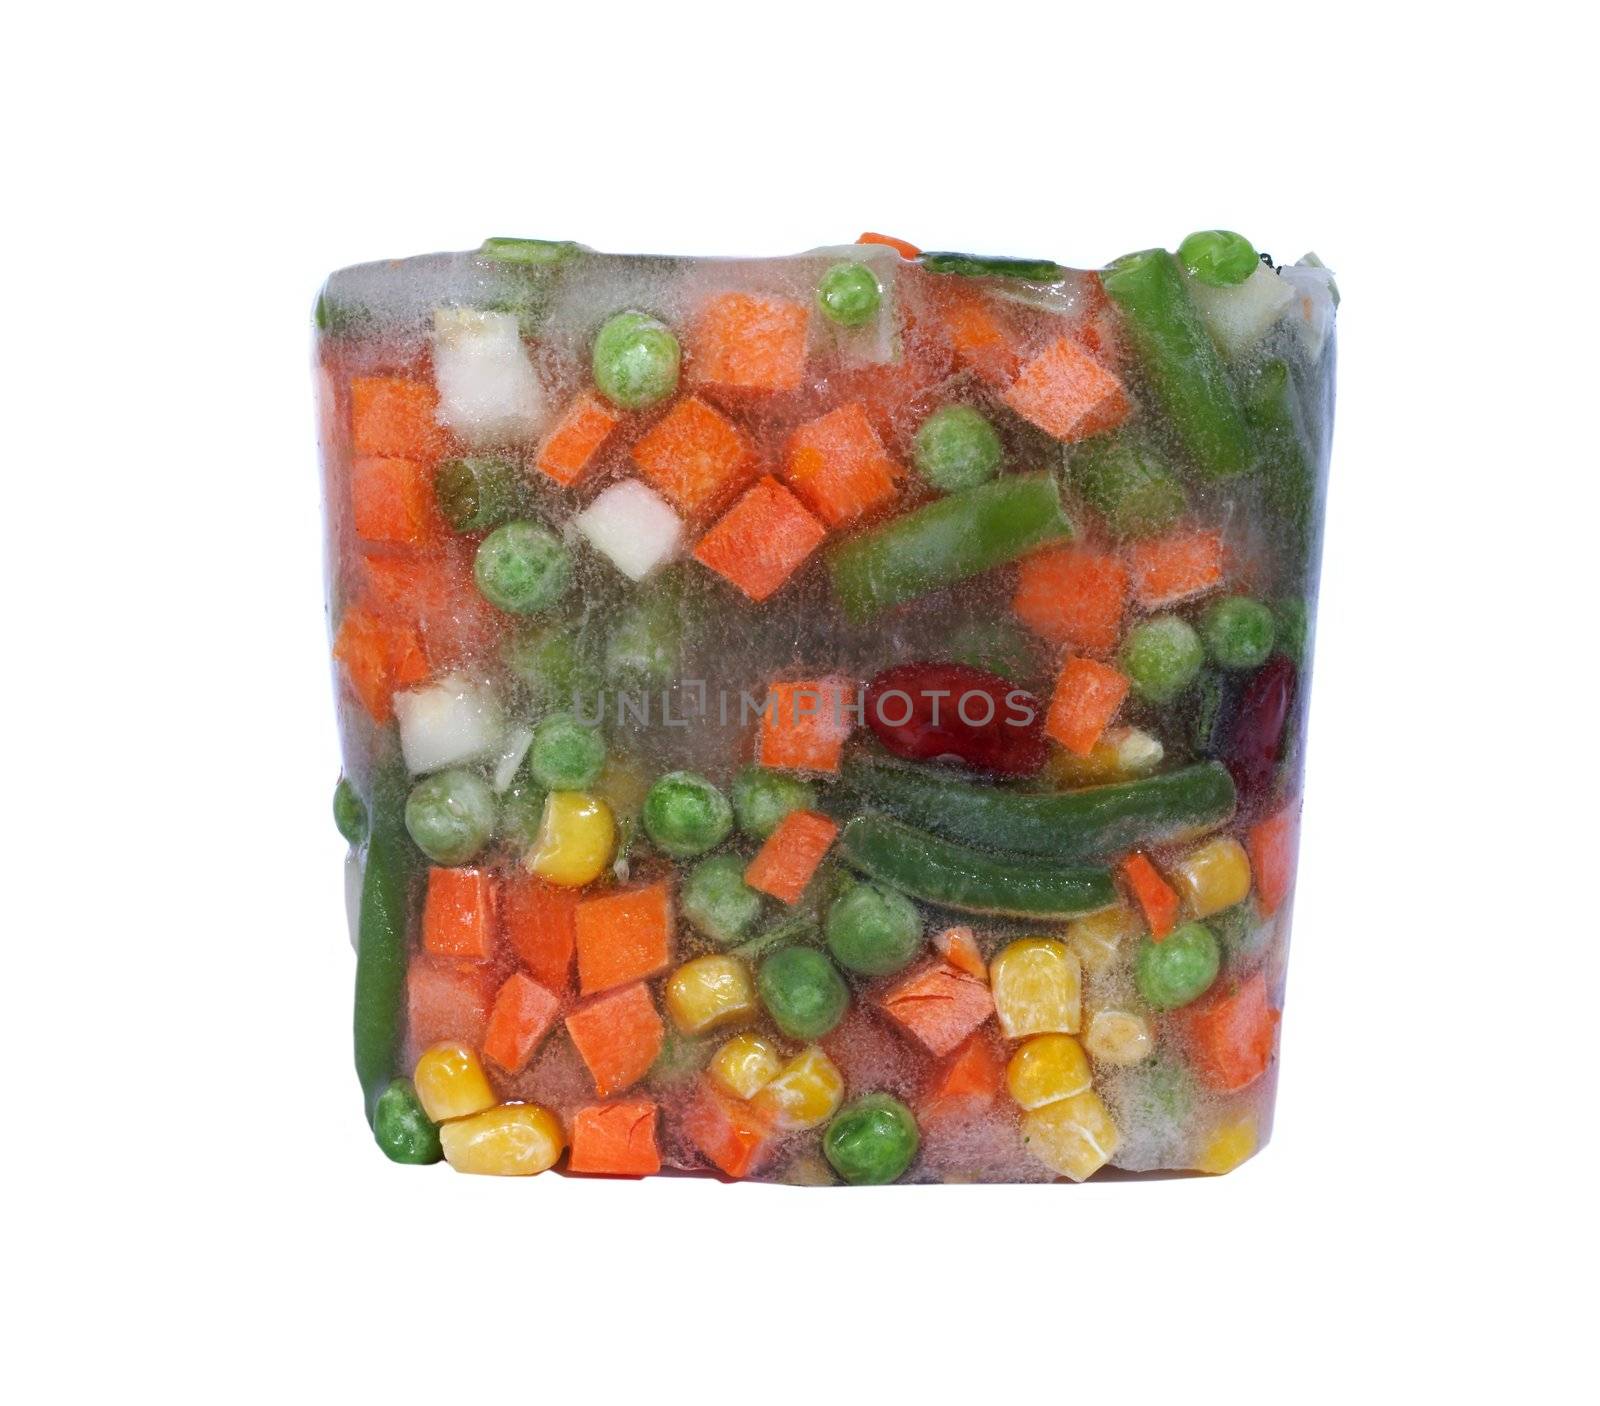 An image of cold vegetable in ice